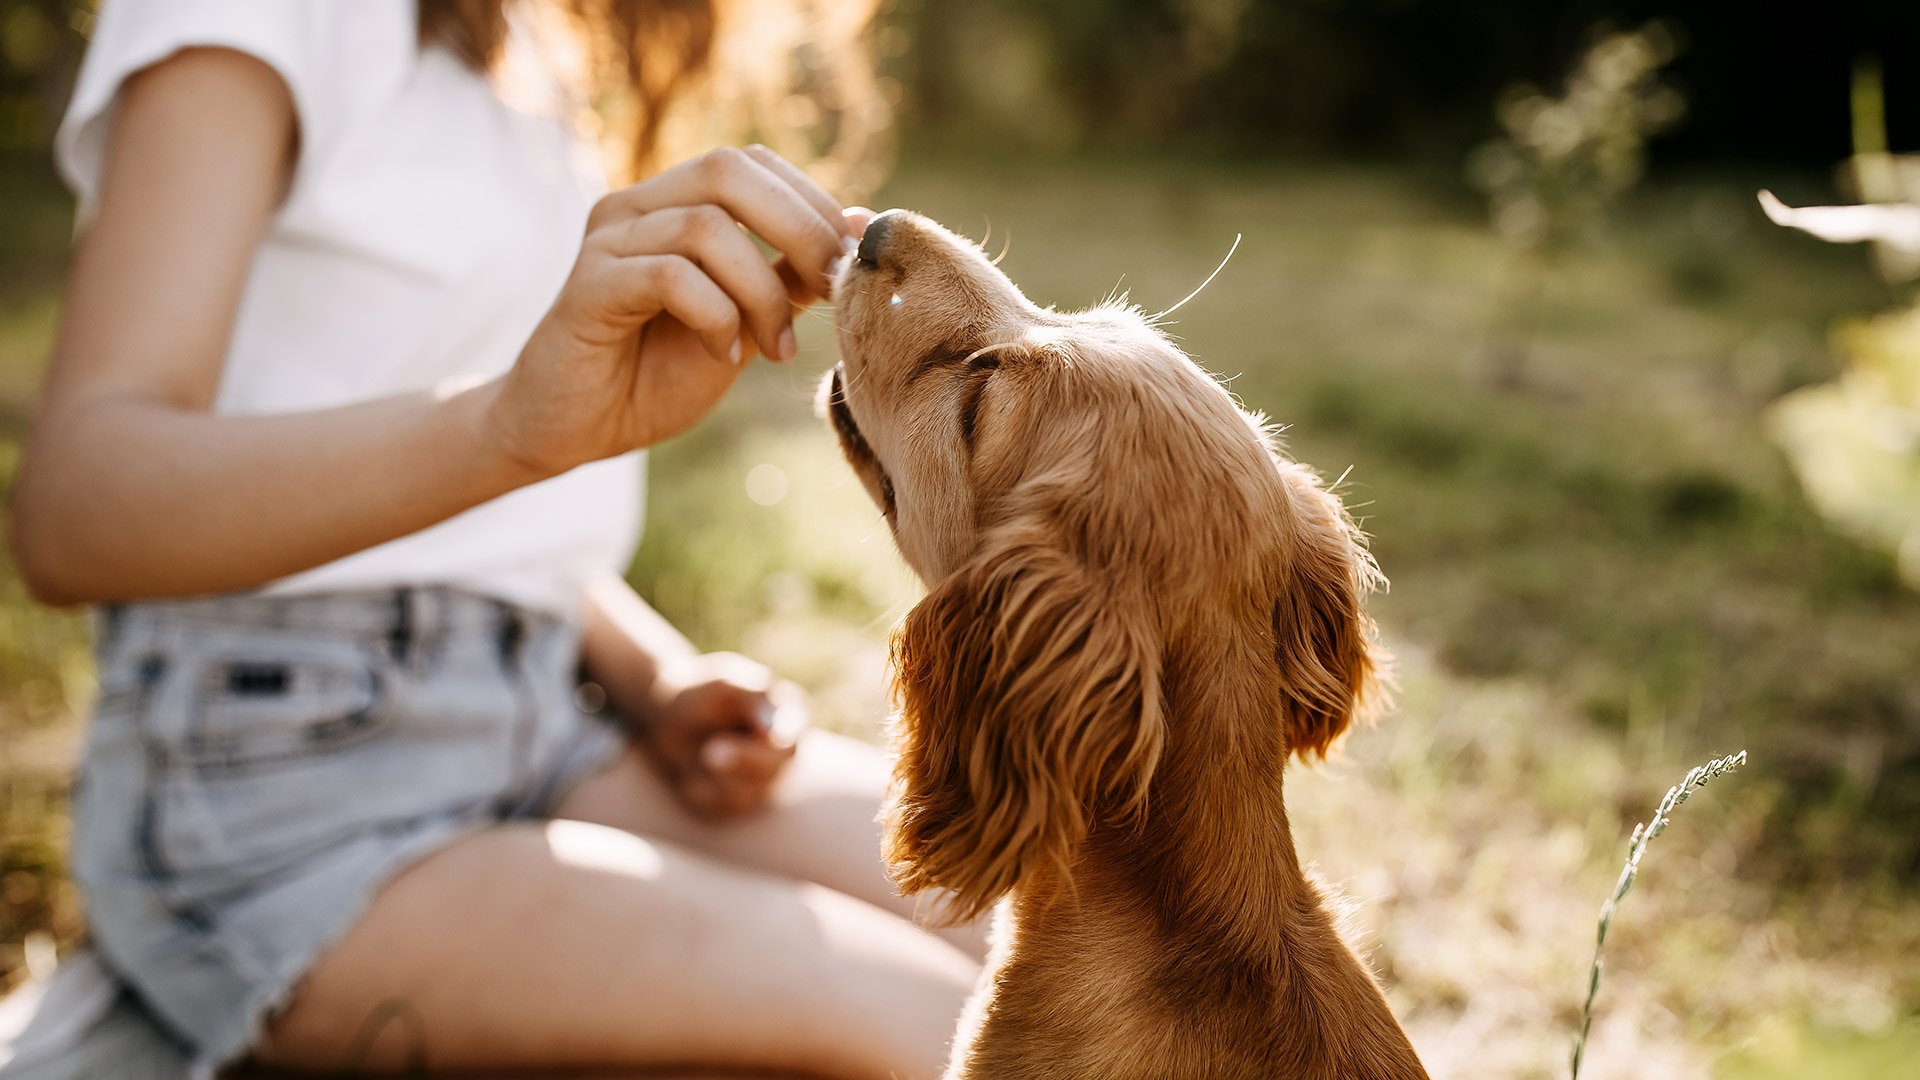 a woman giving her dog a treat, dog reaching up for the treat with it's nose